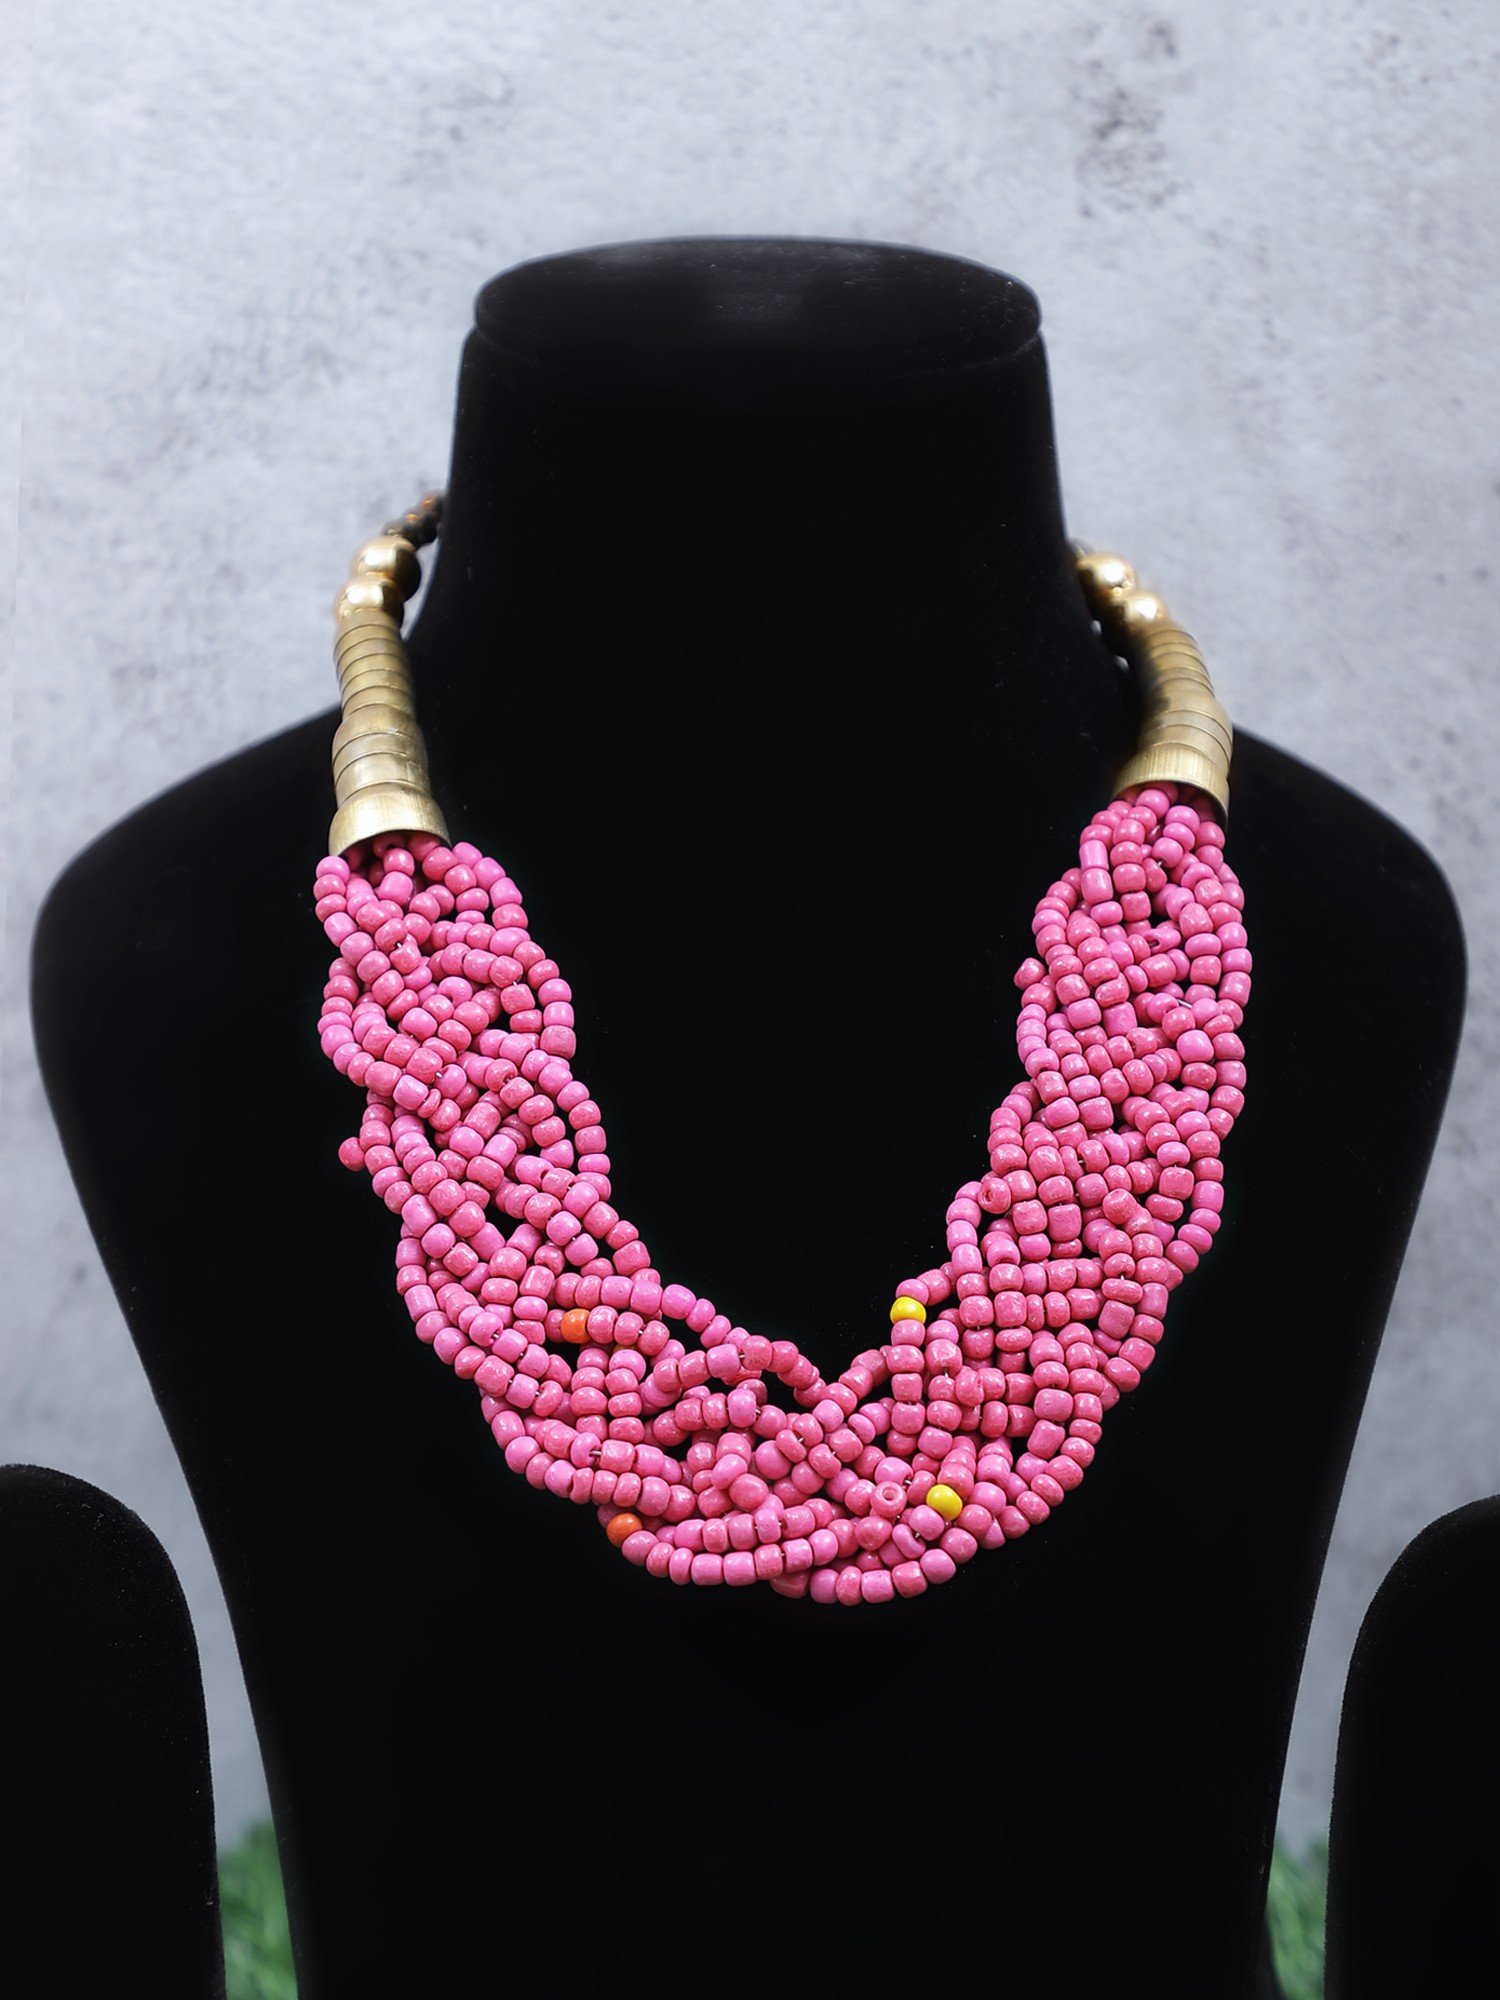 Braided Bead Necklace | Indian Necklaces with Unique Designs | Exotic ...